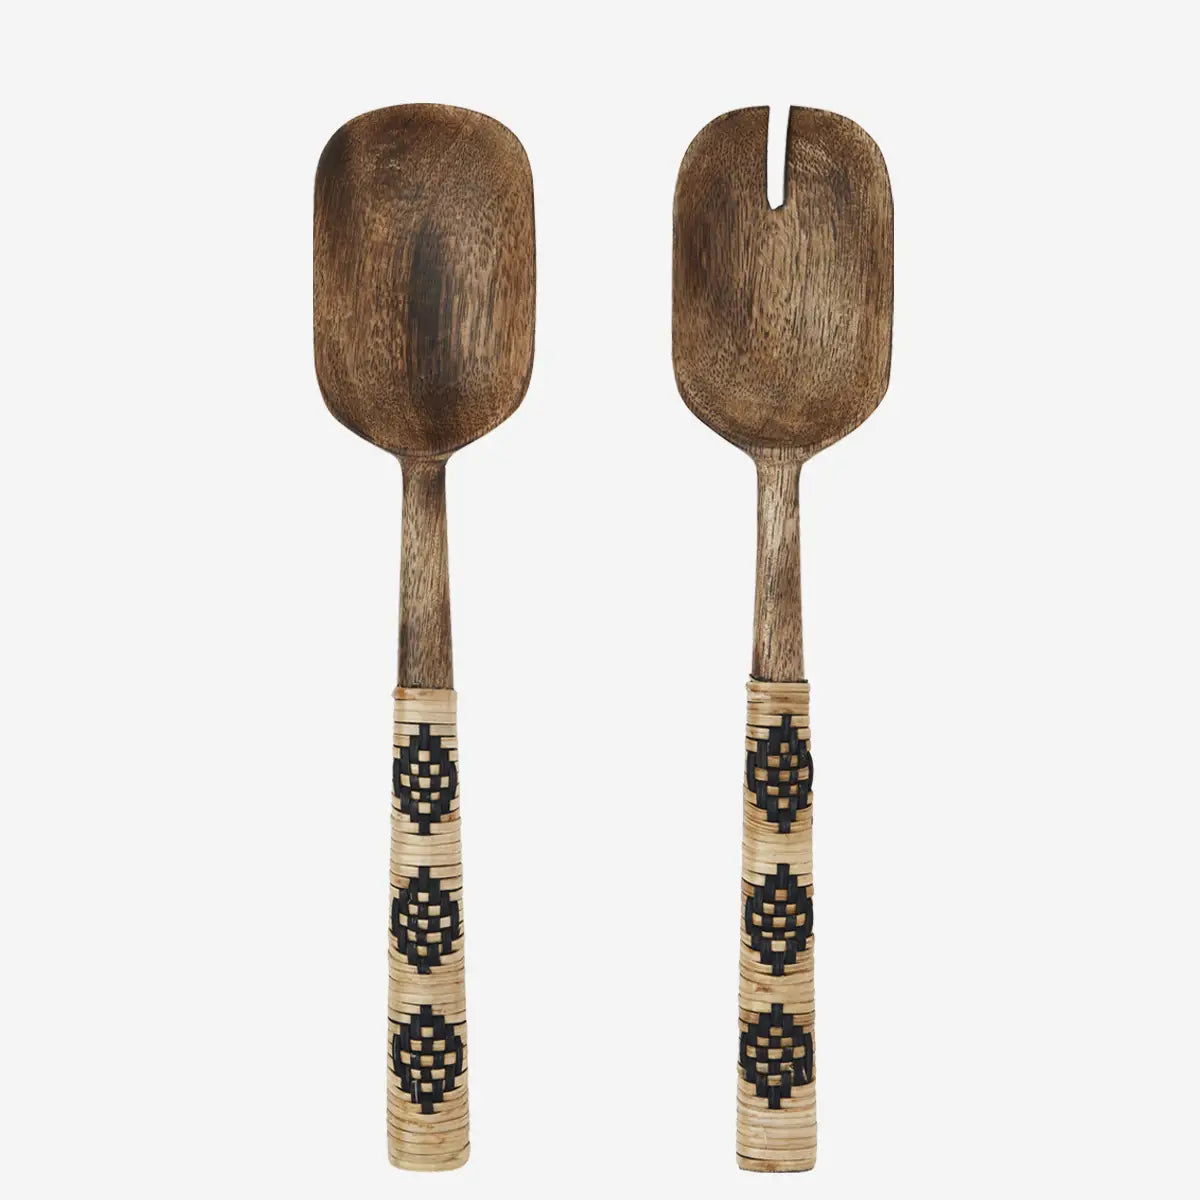 Wooden salad set with rattan